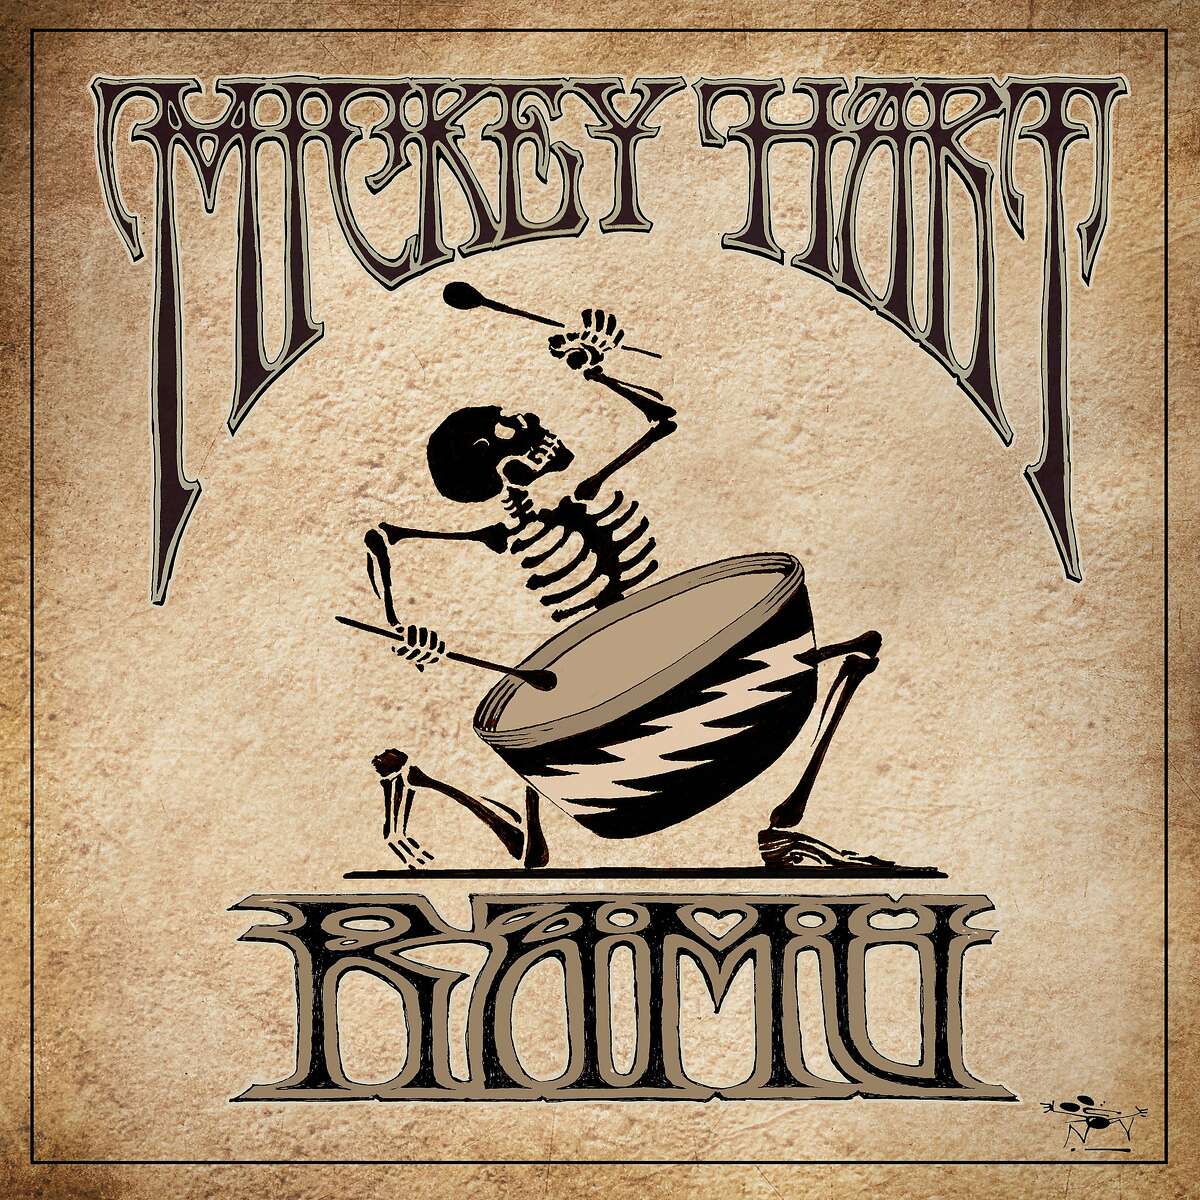 Mickey Hart of the Grateful Dead has a new album titled "RAMU" out Nov. 10.